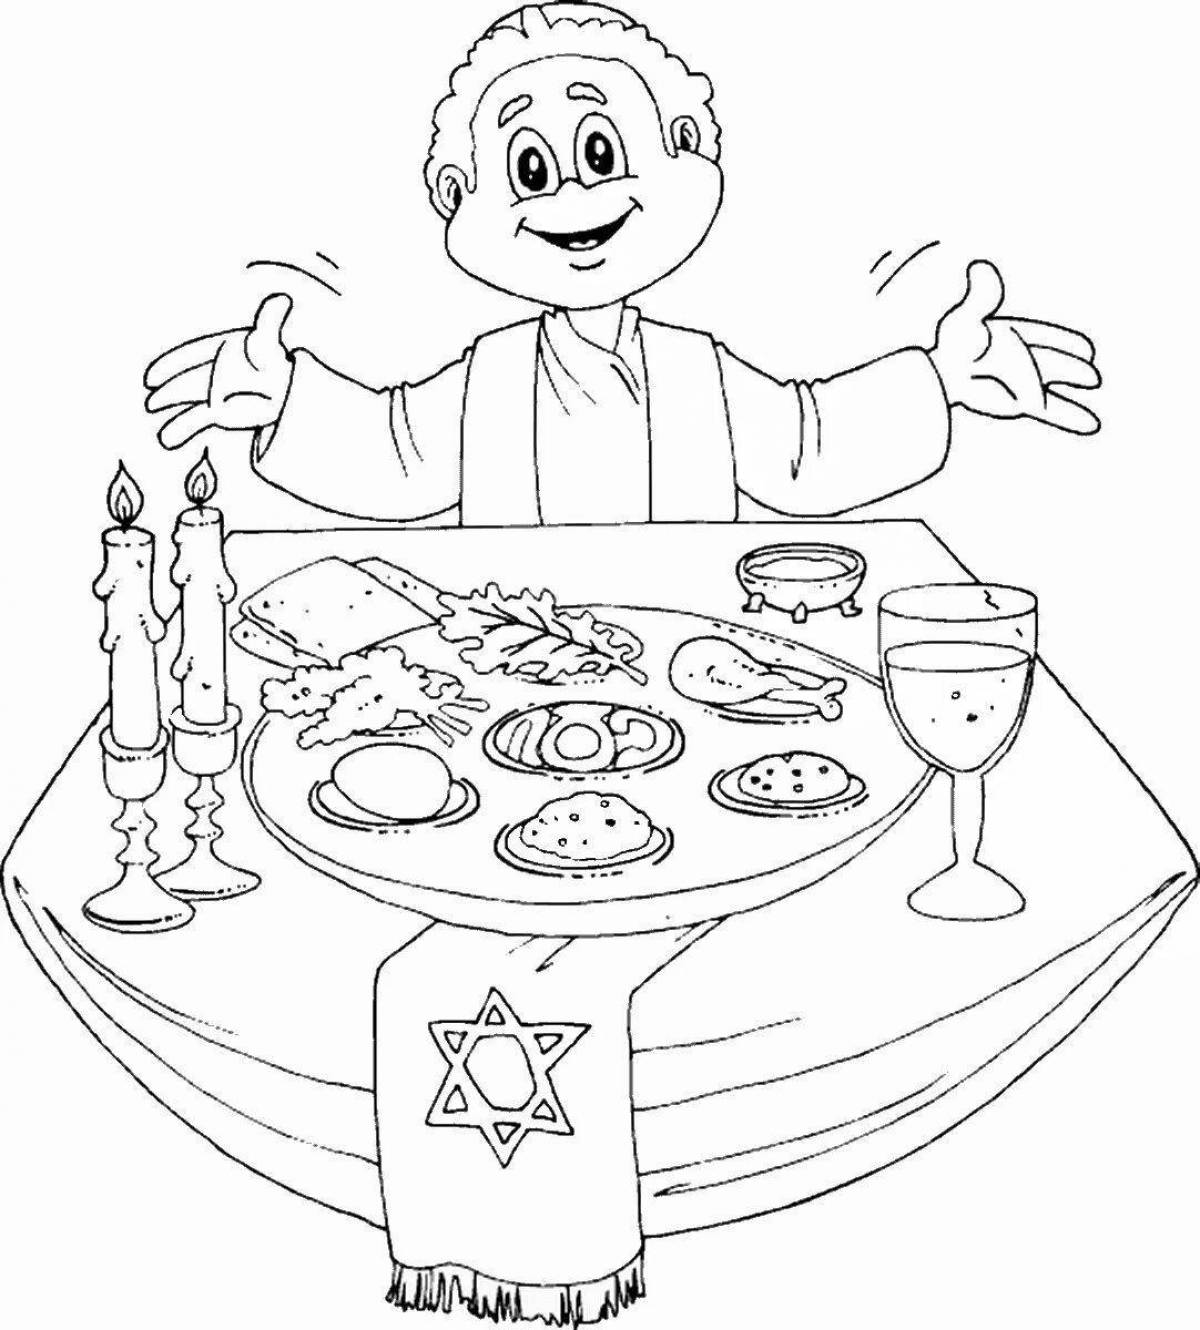 Coloring page festive dinner